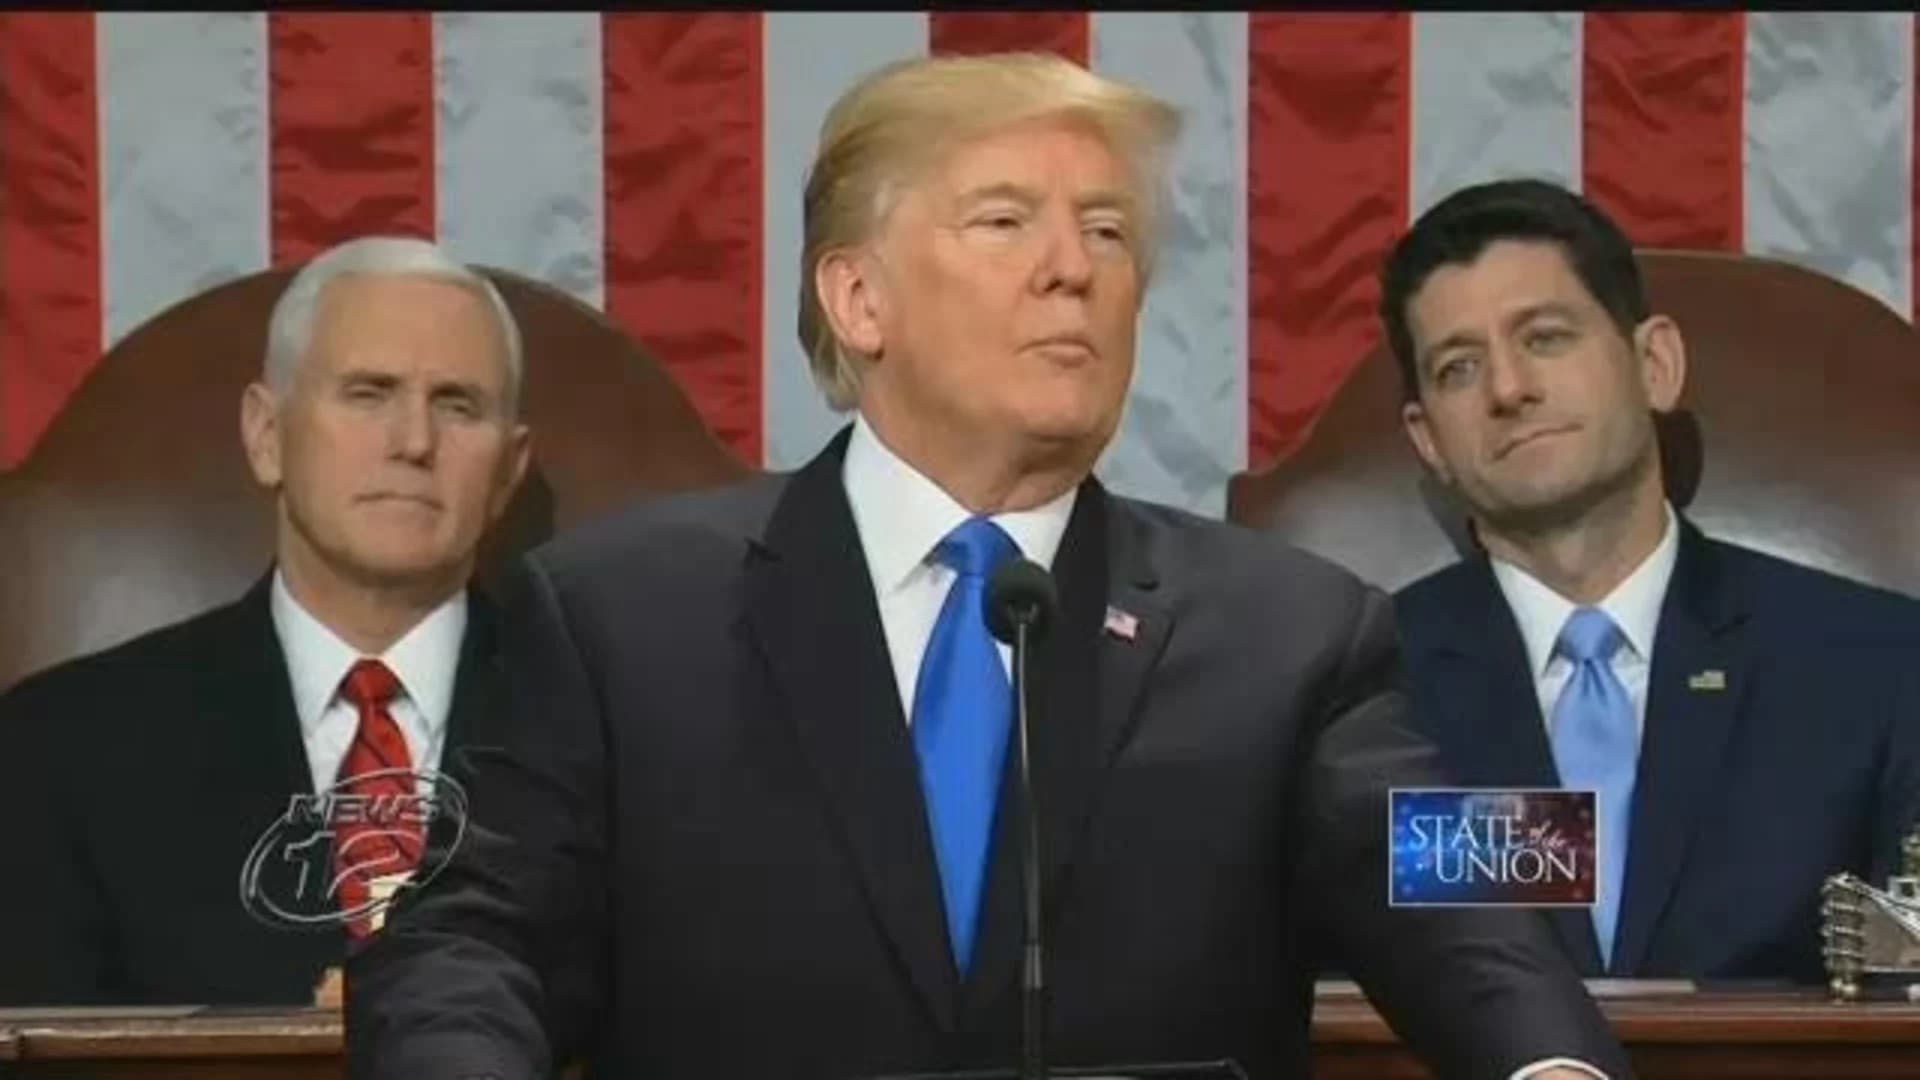 Live coverage of the State of the Union address